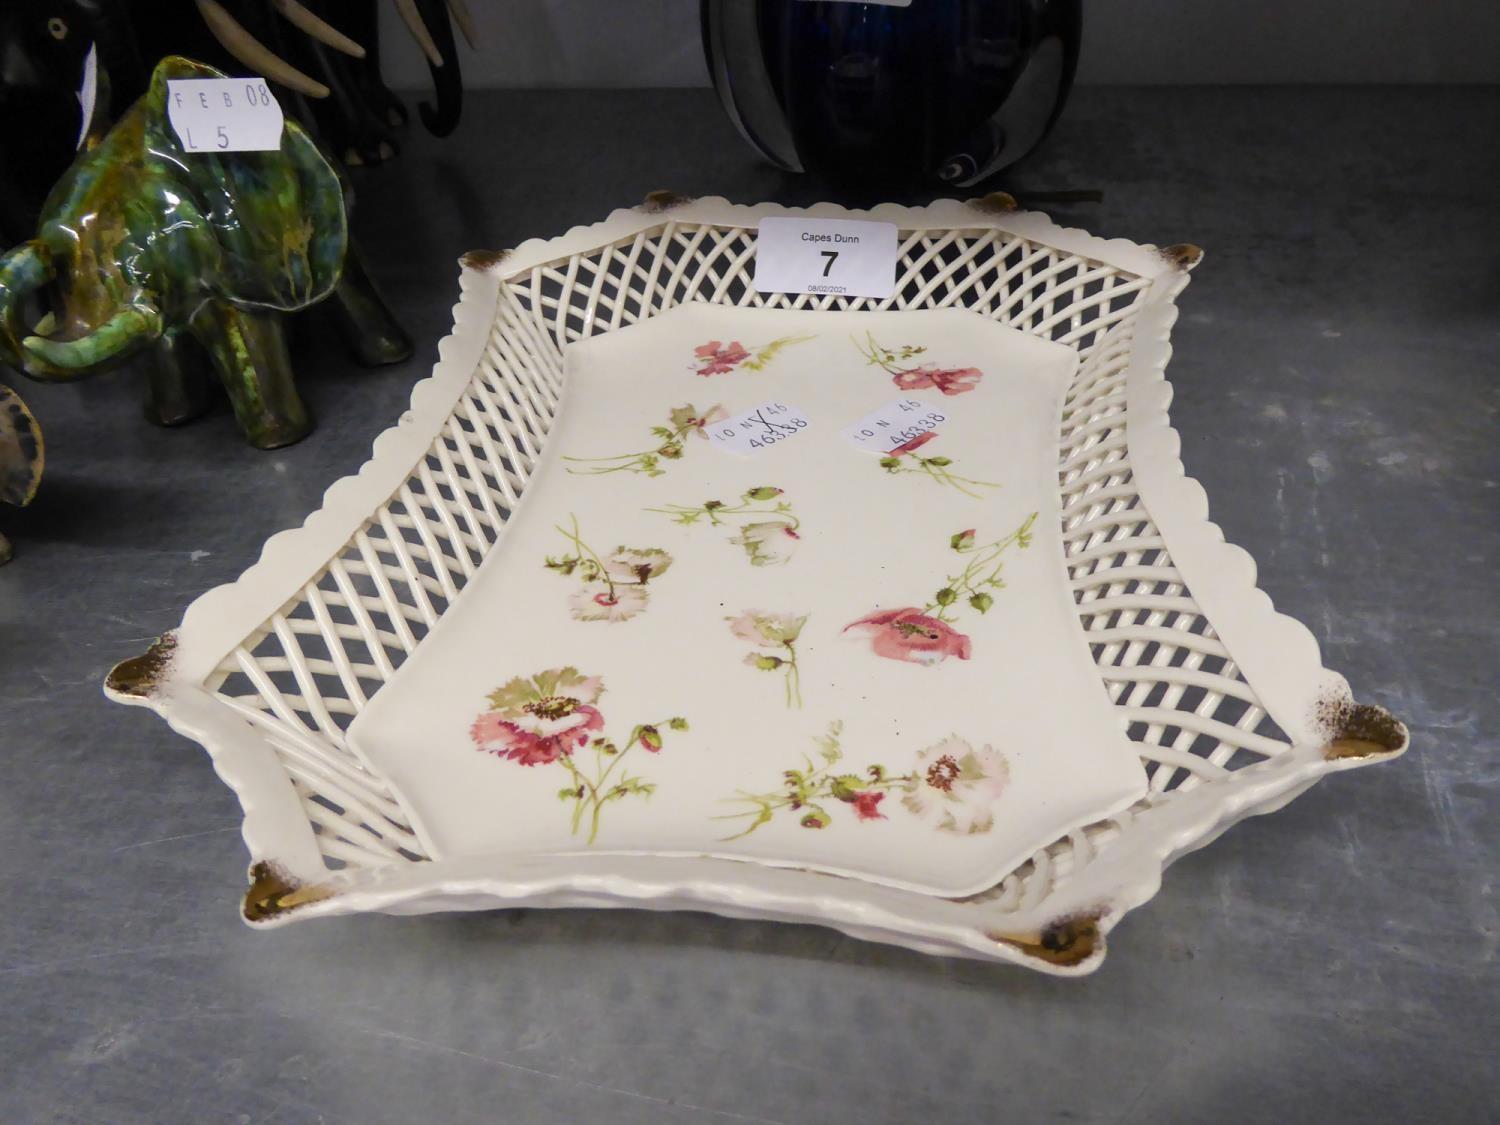 CONTINENTAL PORCELAIN OBLONG DISH WIH CANTED CORNERS, TRELLIS PIERCED SIDES, DECORATED WITH